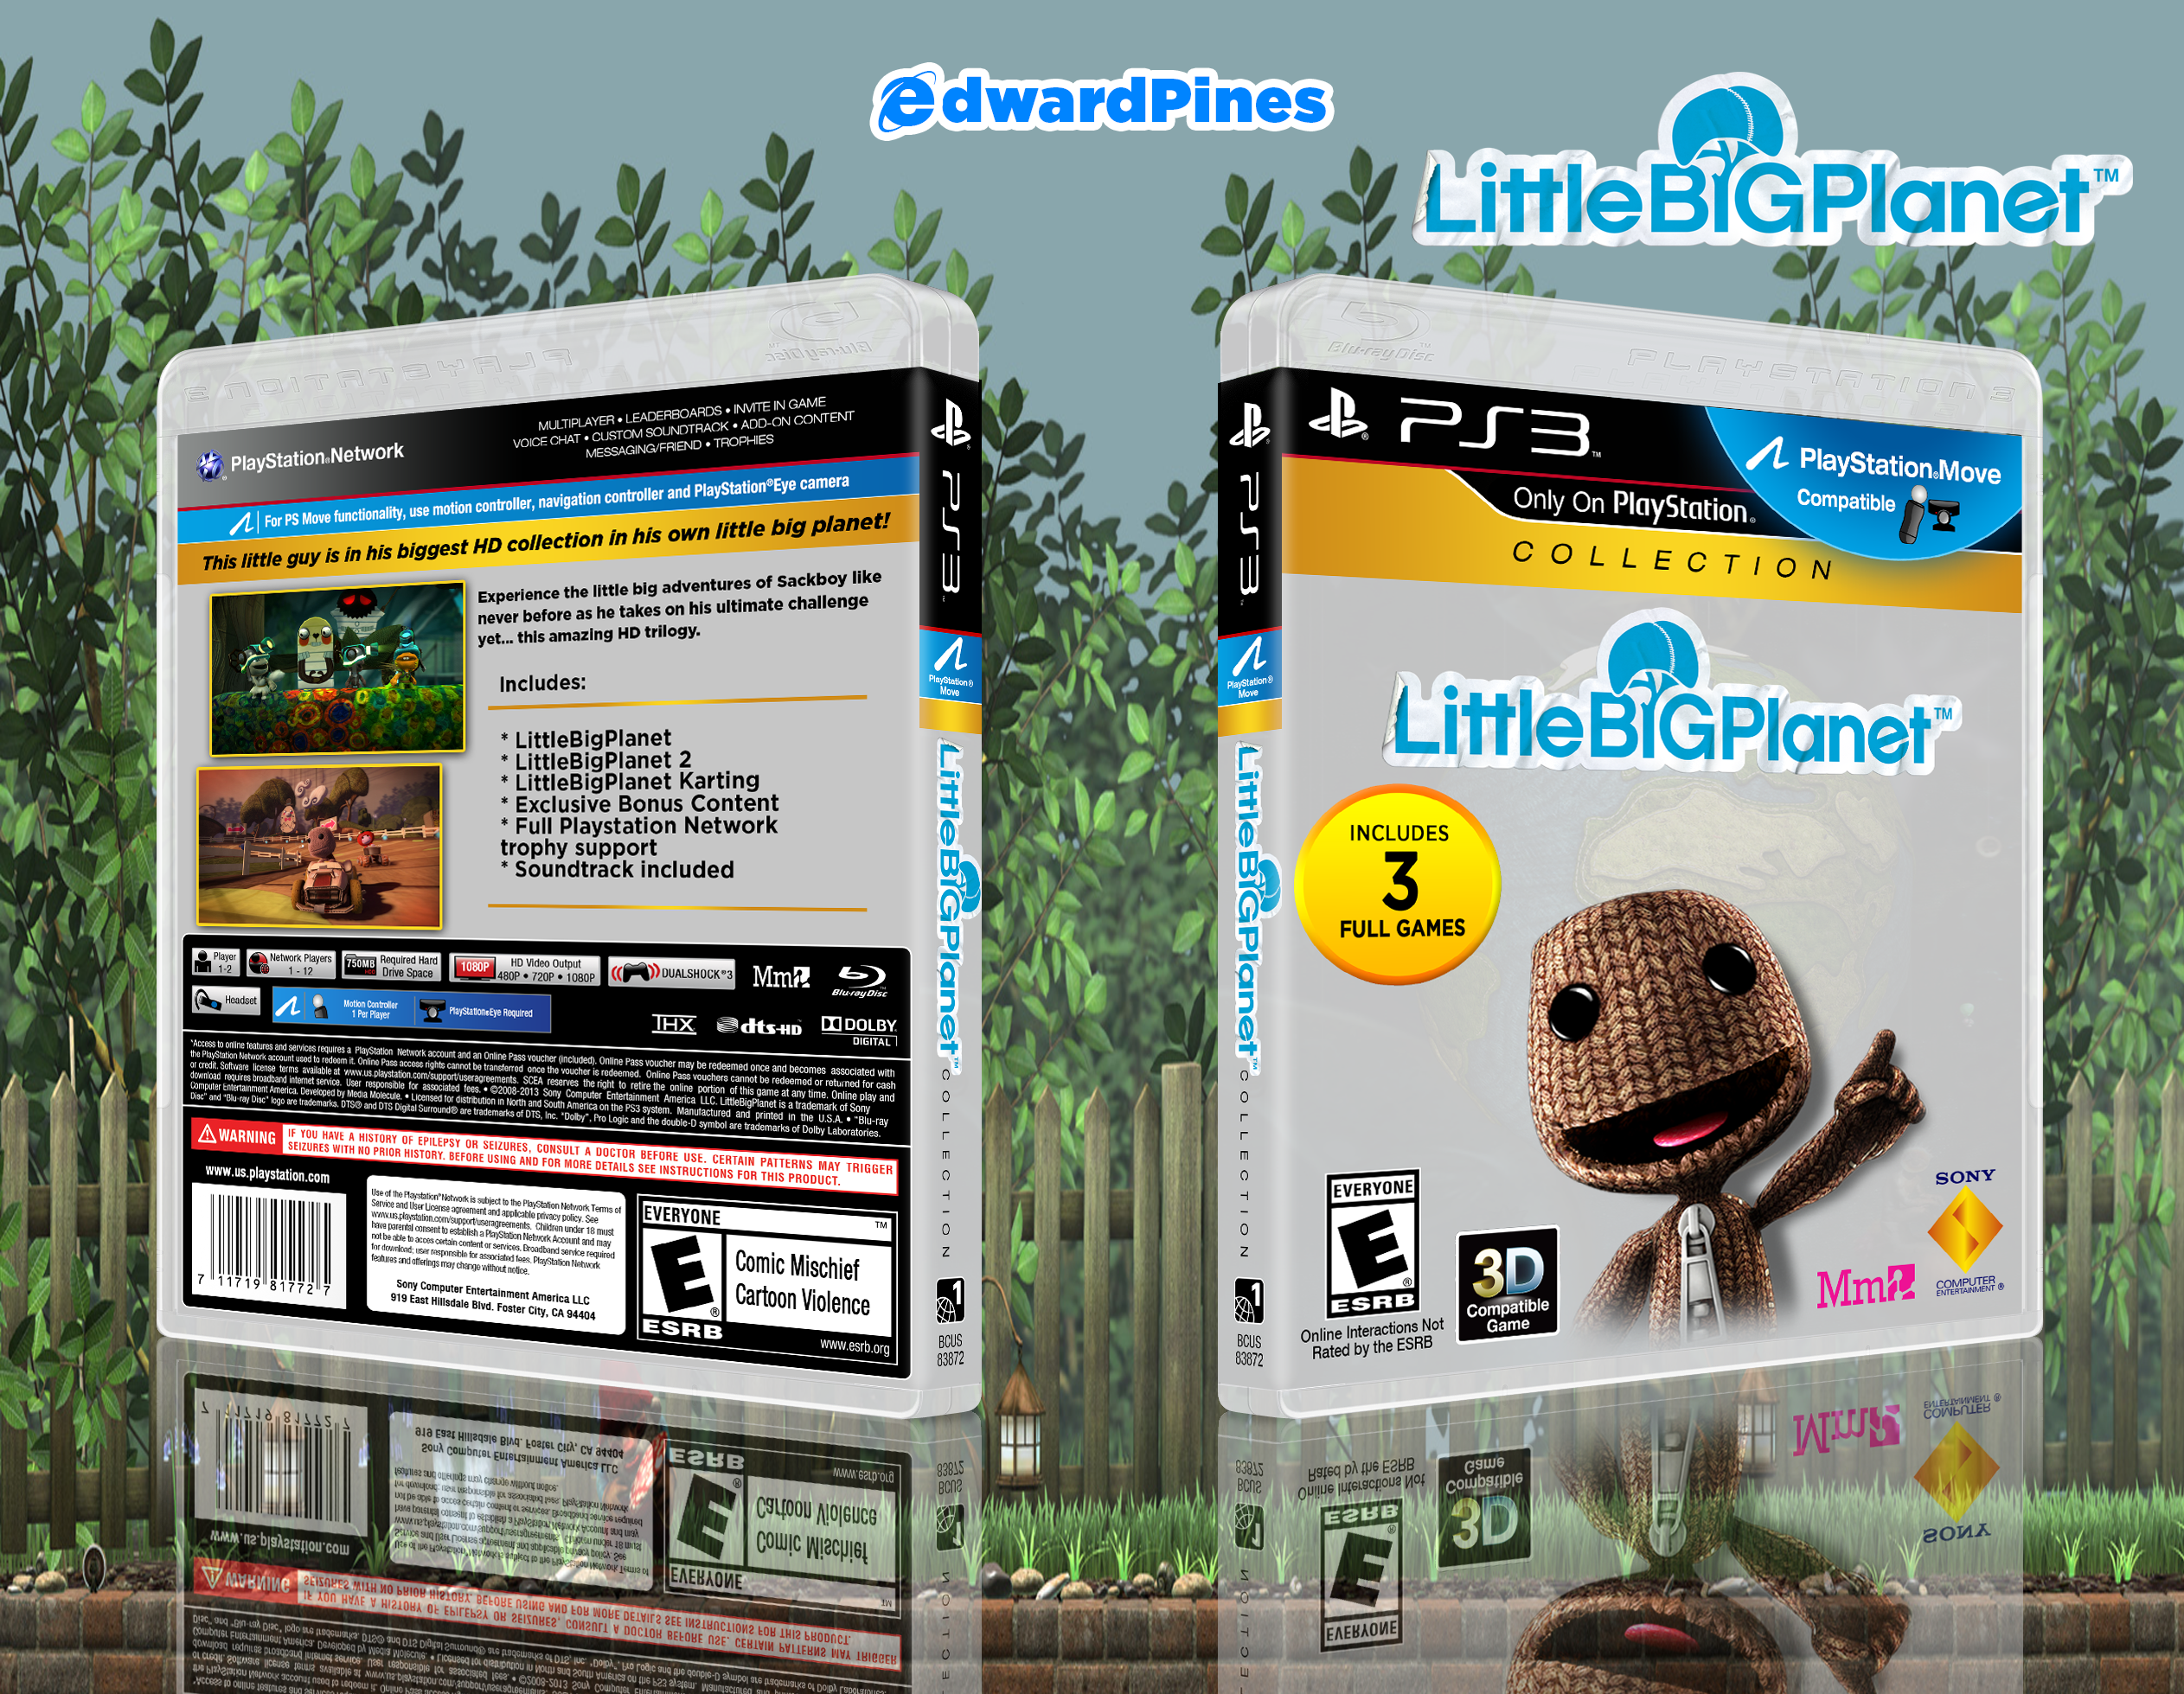 LittleBigPlanet Collection box cover